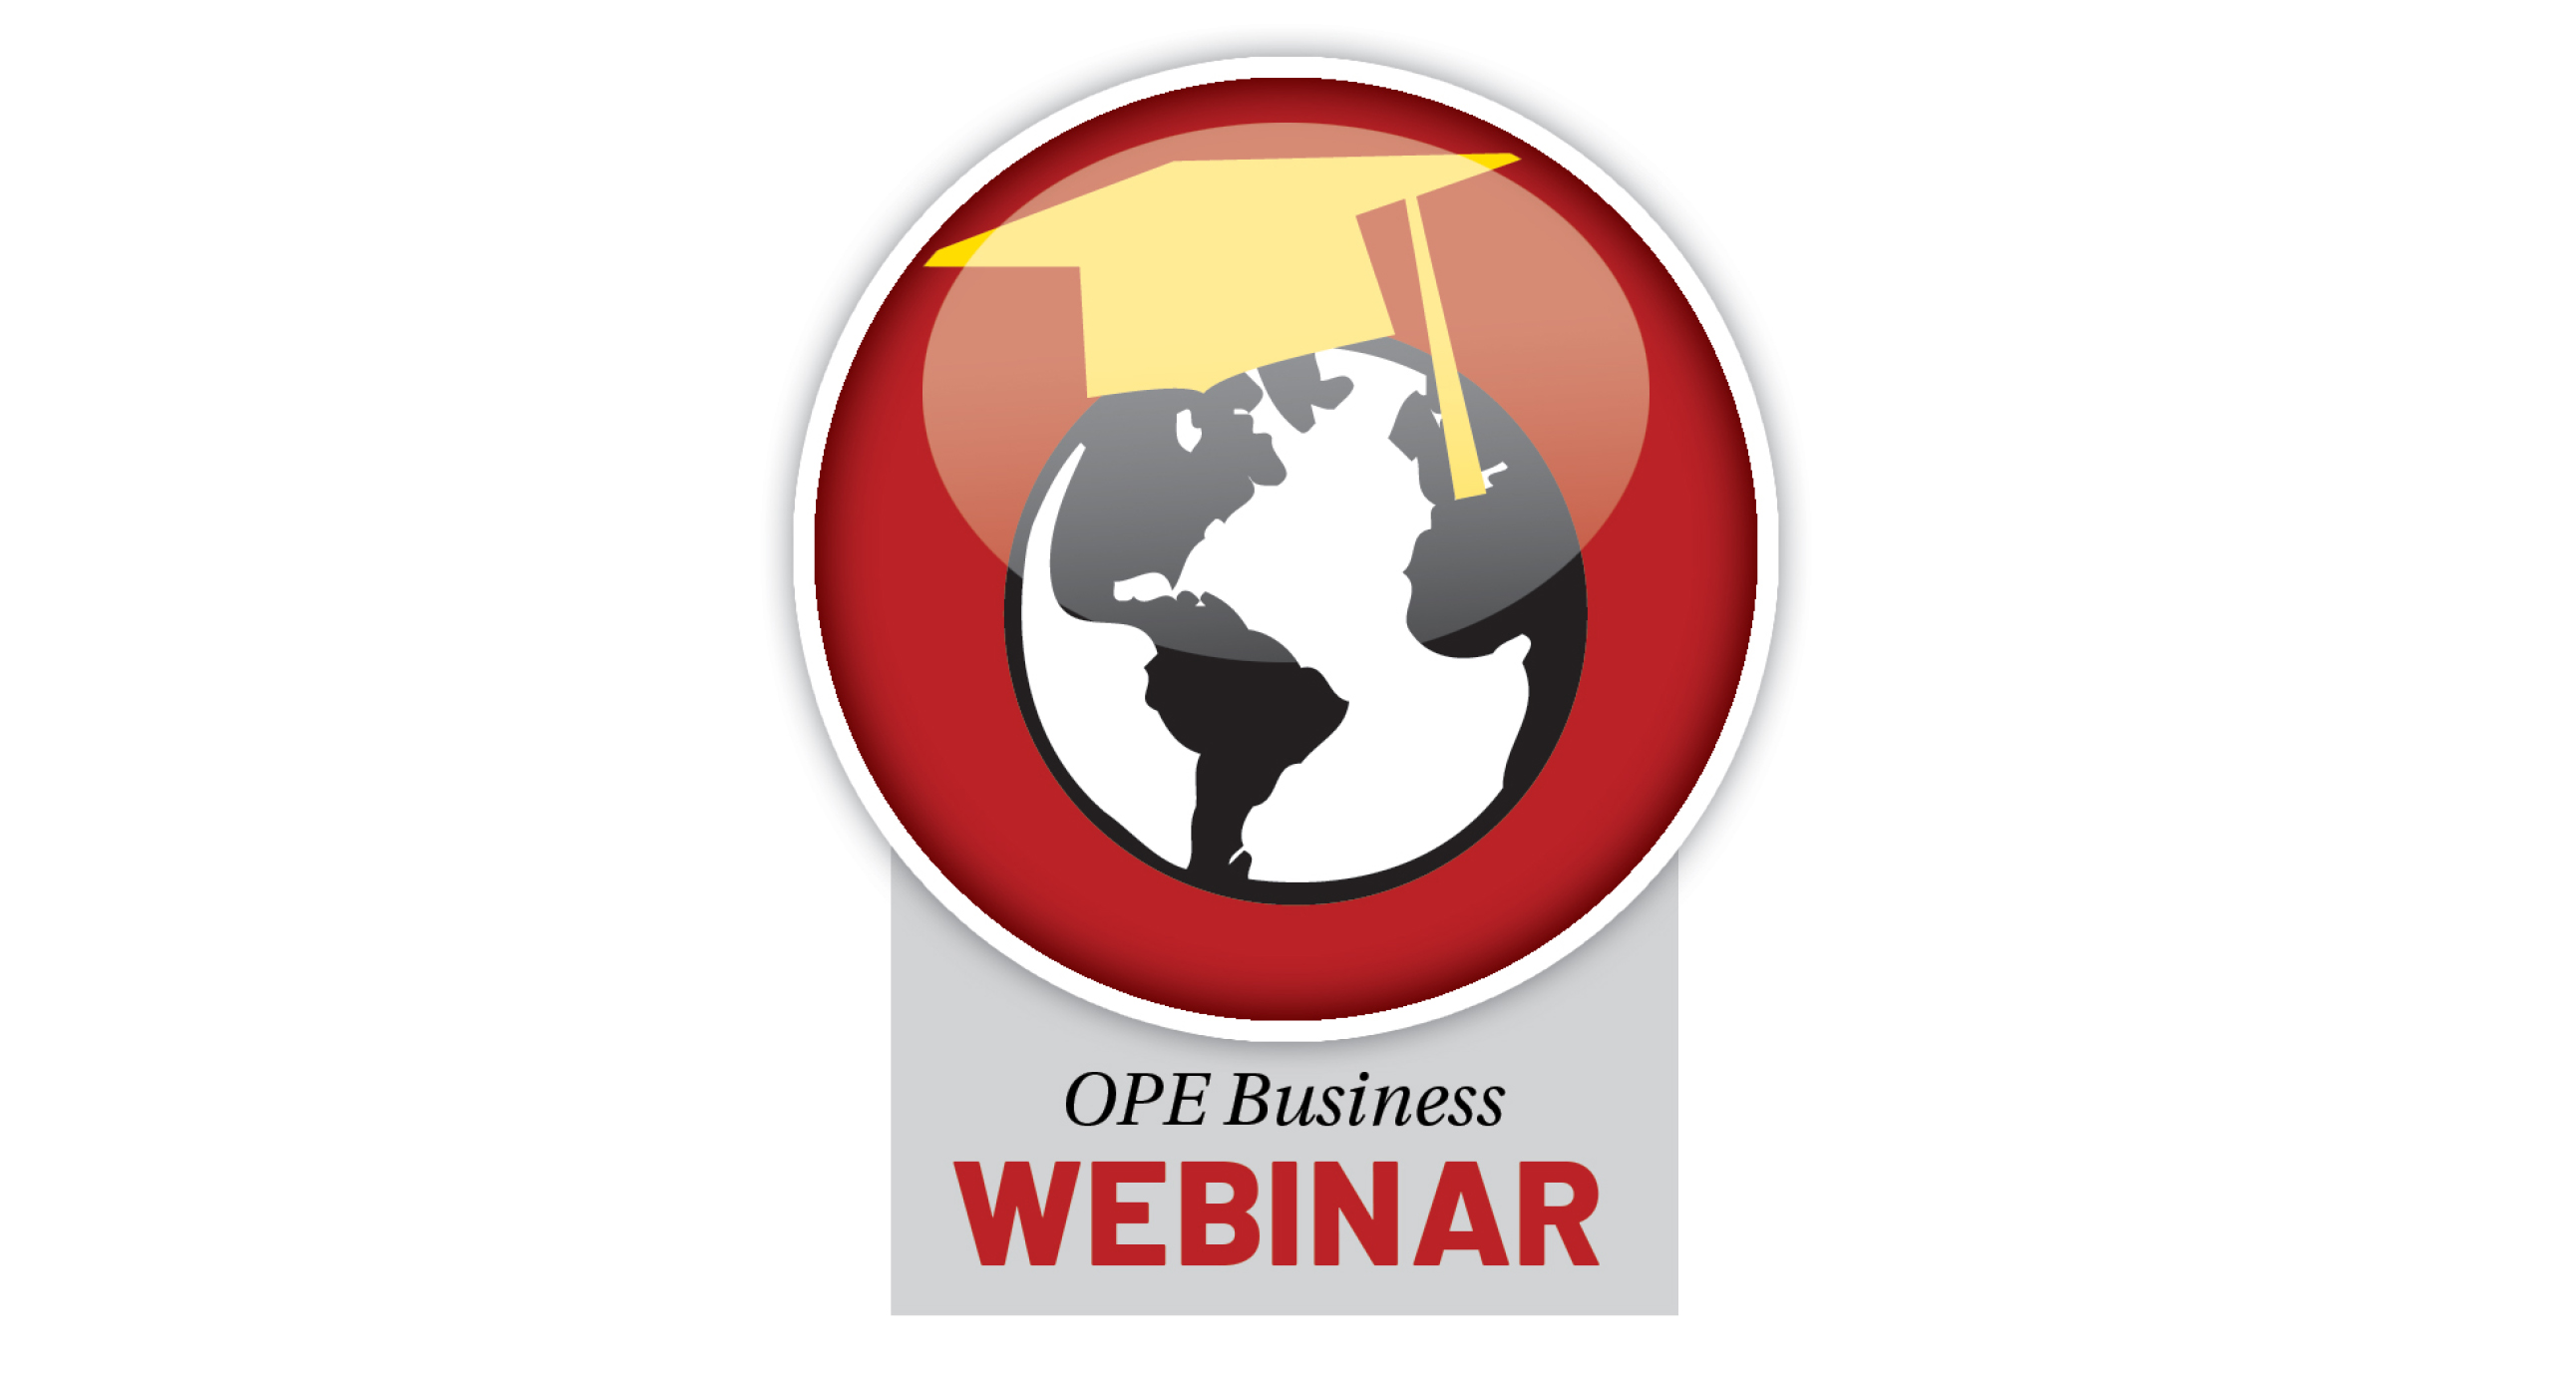 Q2 retail trends revealed on OPE live webinar sponsored by Cub Cadet